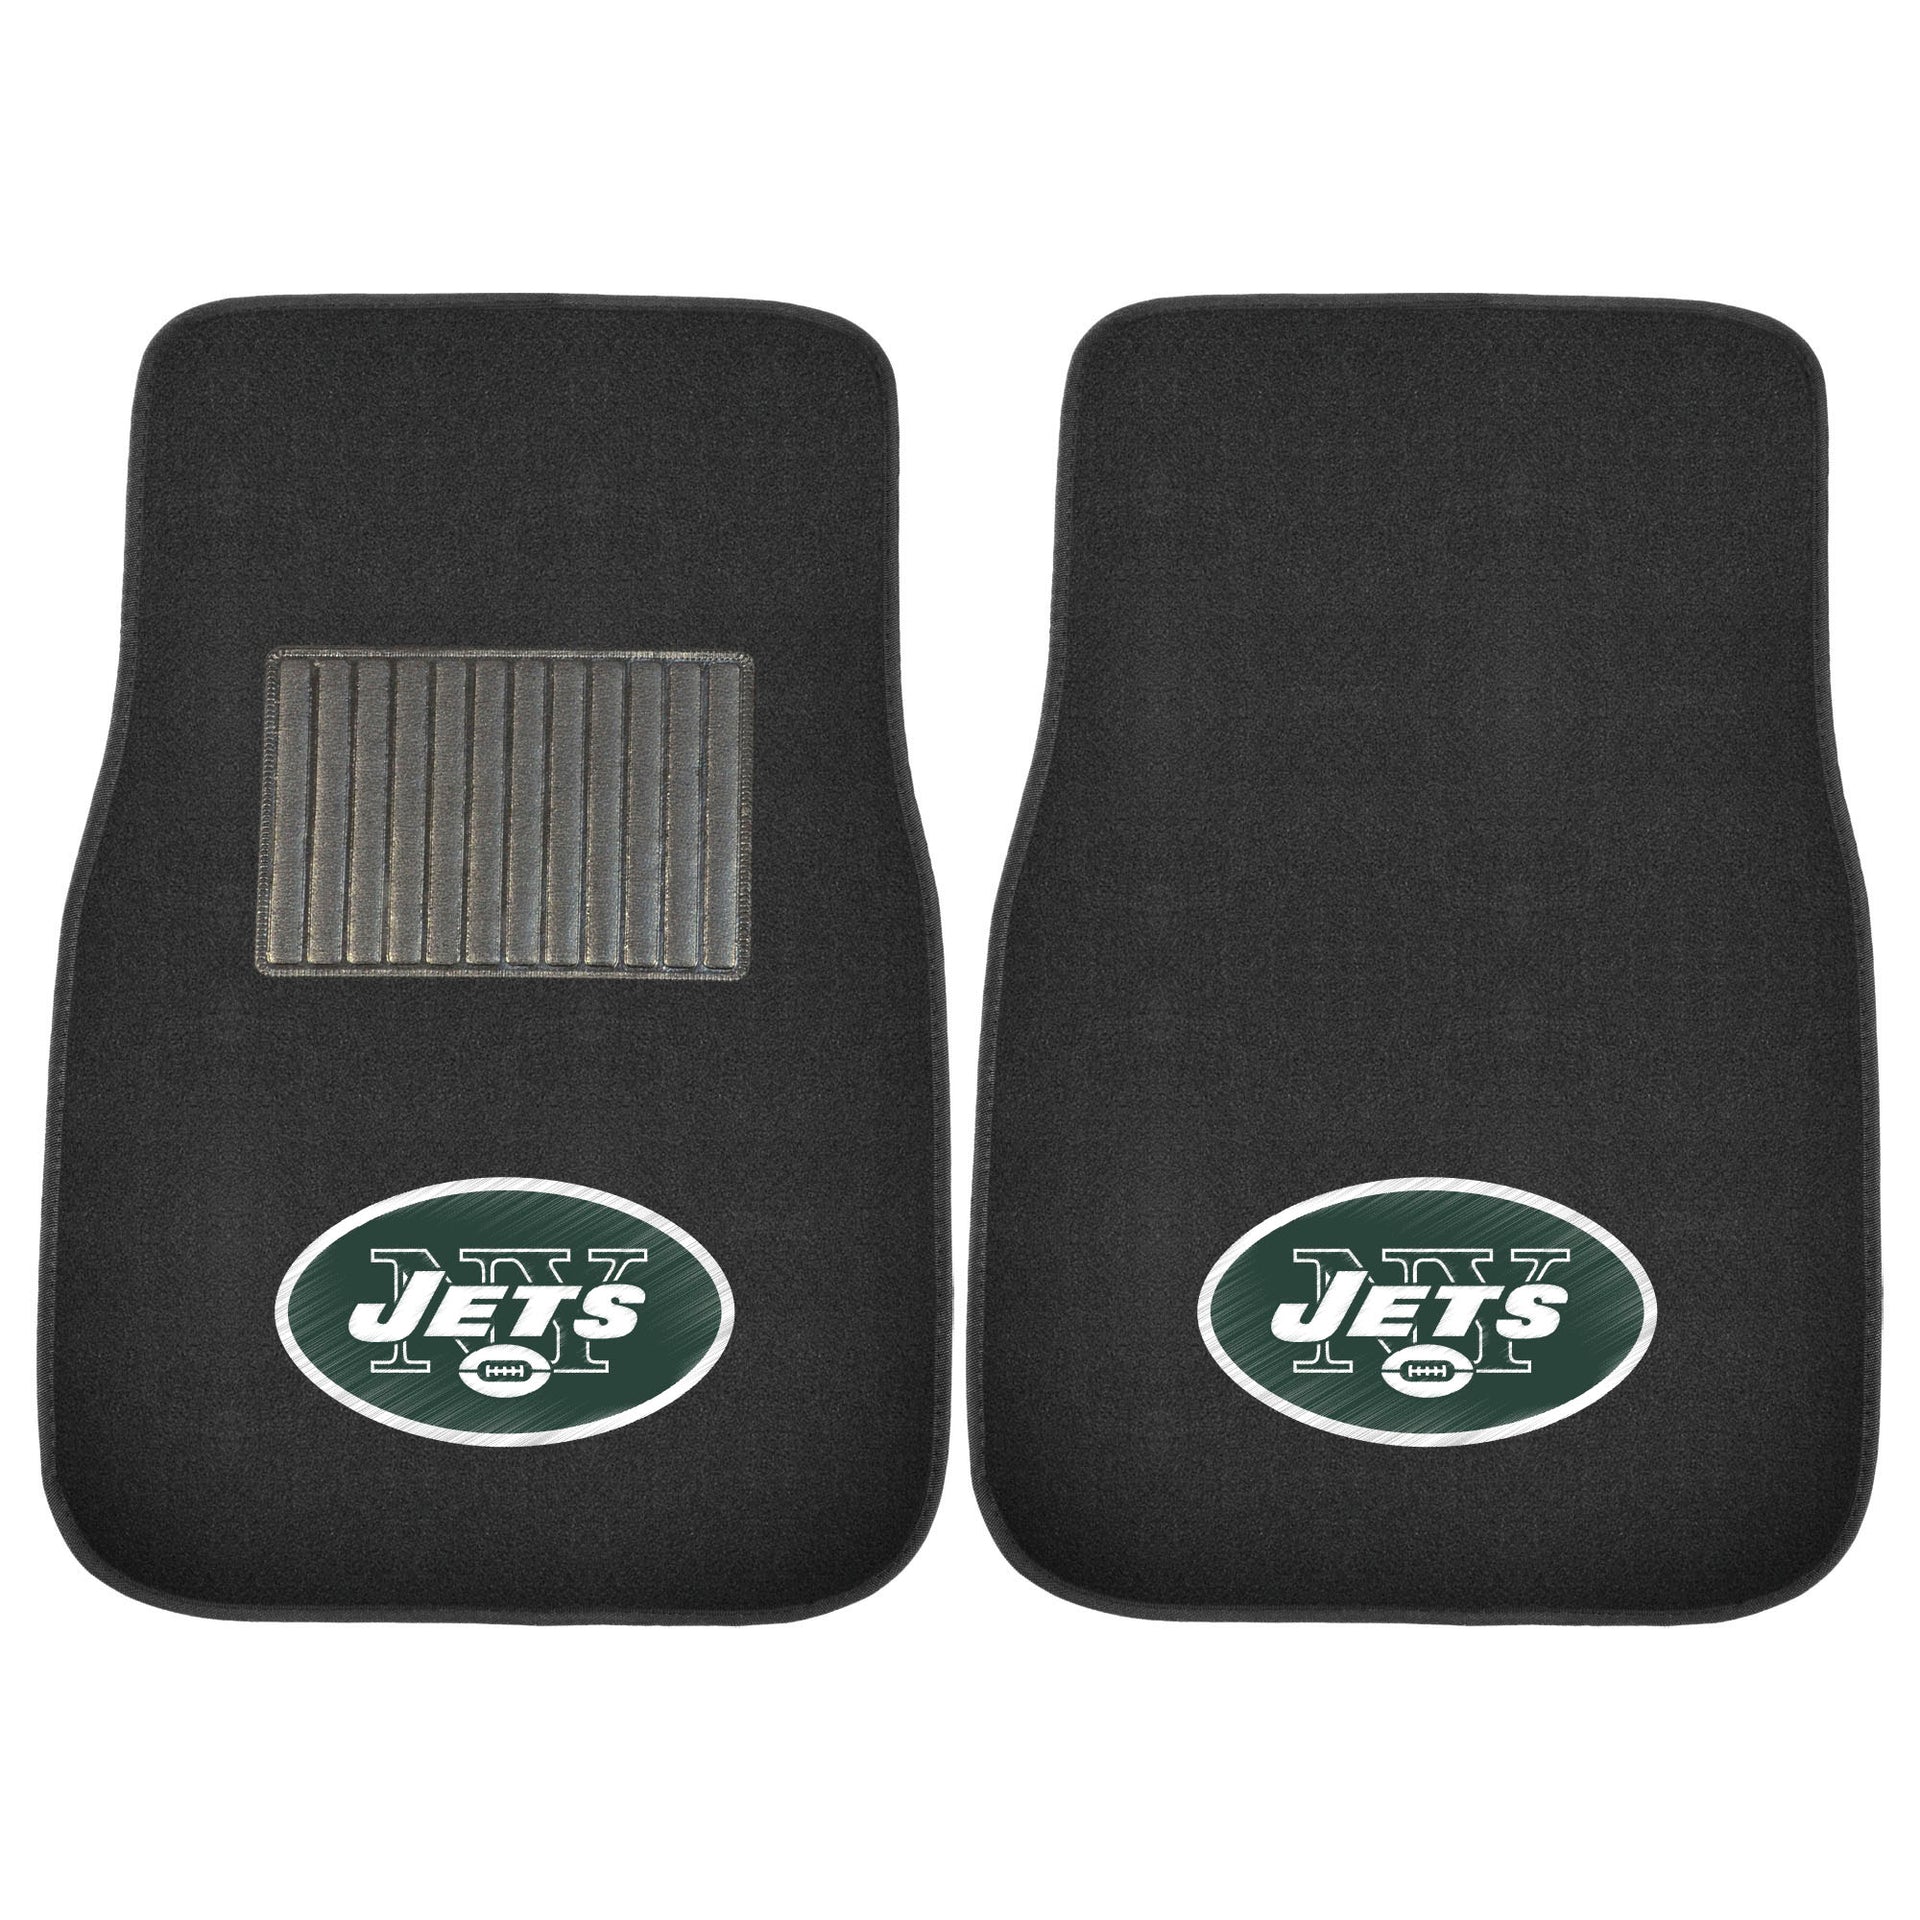 New York Jets NFL Football 2 Piece Embroidered Car Mat Set - Dynasty Sports & Framing 